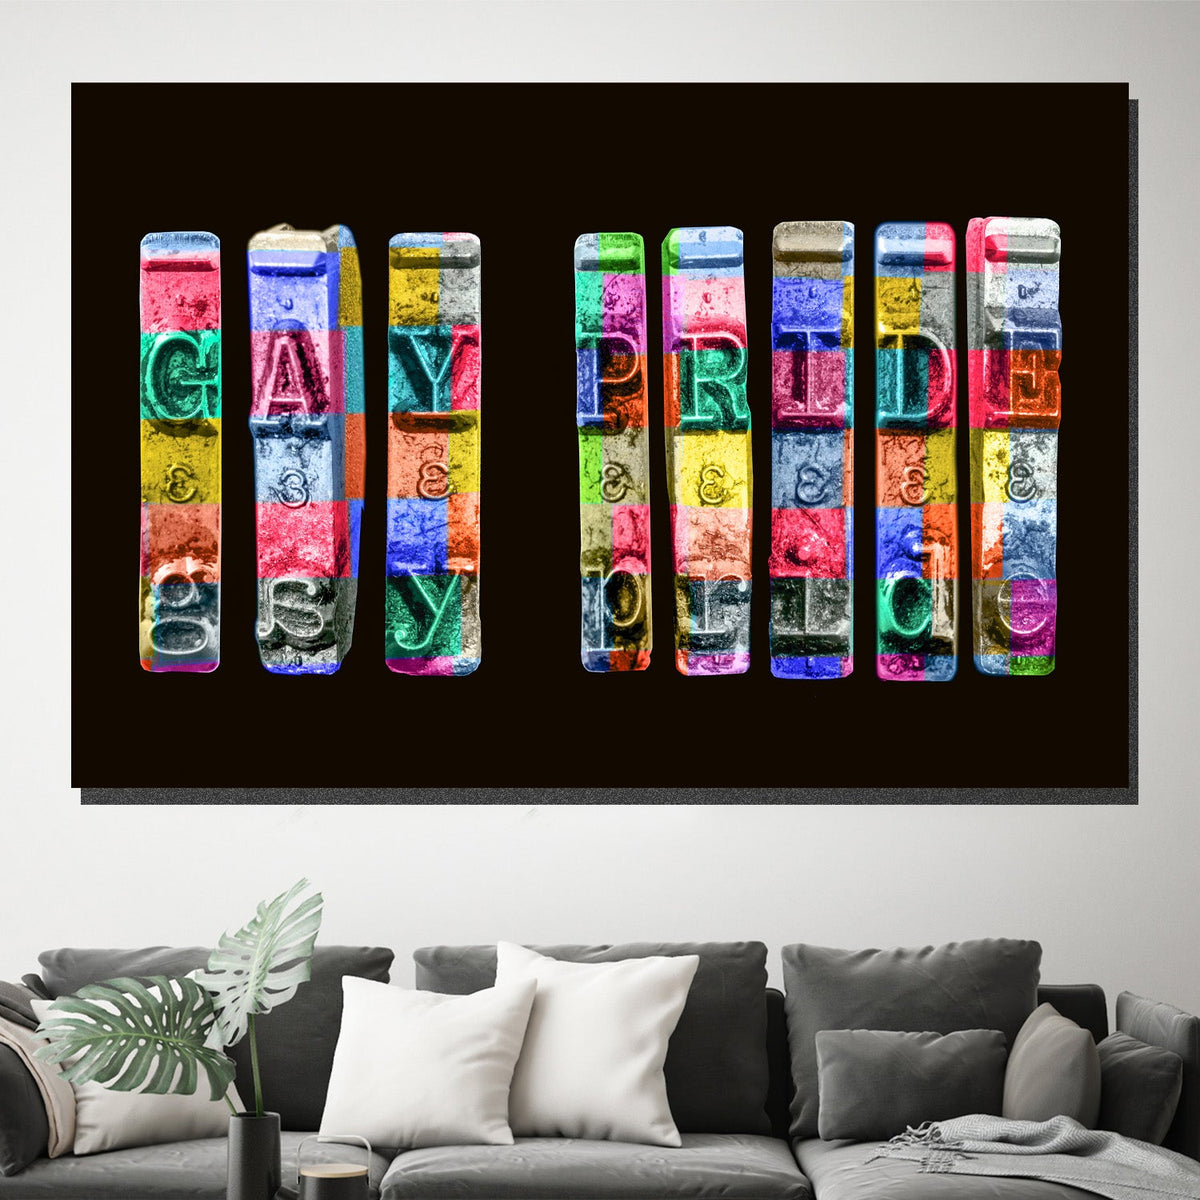 https://cdn.shopify.com/s/files/1/0387/9986/8044/products/GayPrideCanvasArtprintStretched-4.jpg